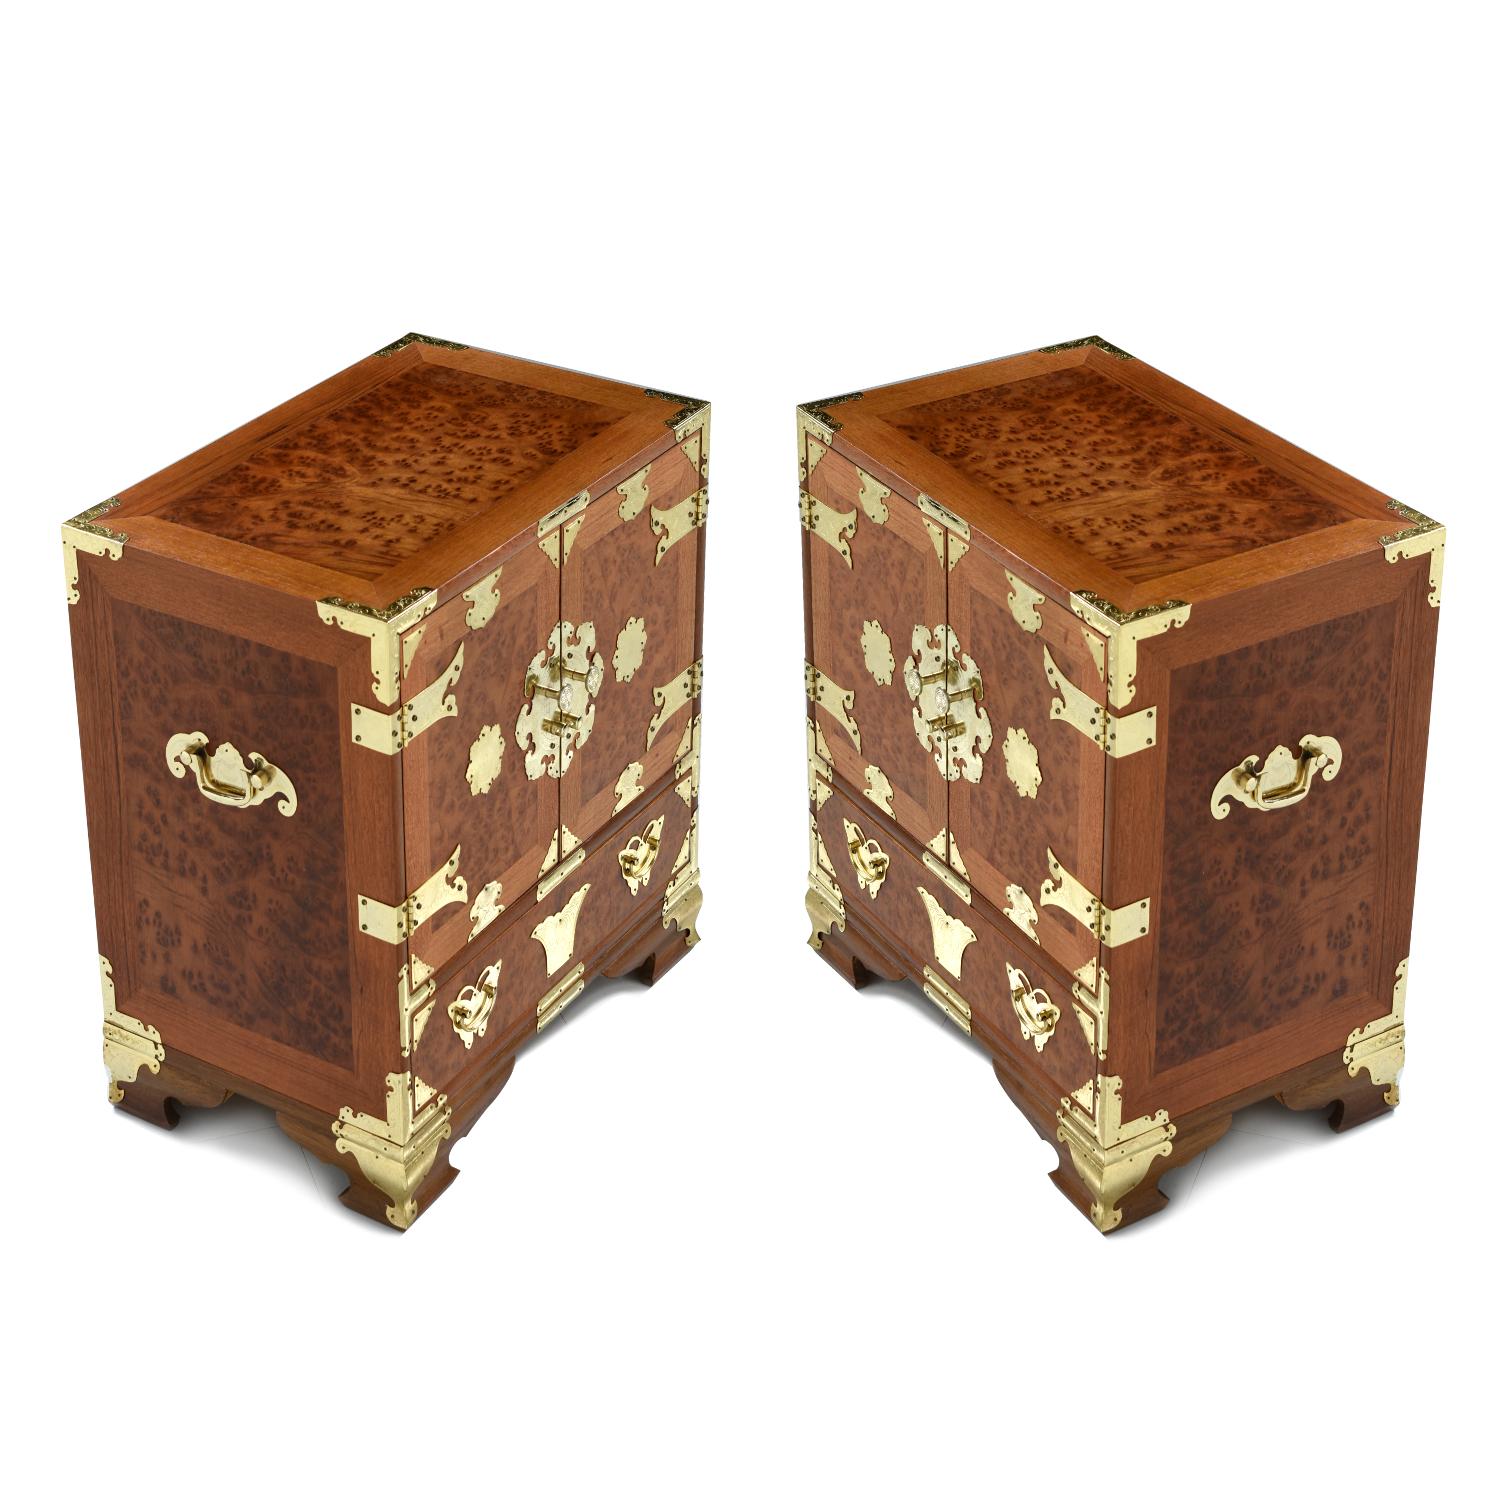 This pair of vintage Campaign style Chinese influence nightstands are absolutely decadent. Crafted from the best of the best, teak and burl woods, and embellished with glittering brass fittings. These cabinets command attention. We are calling these